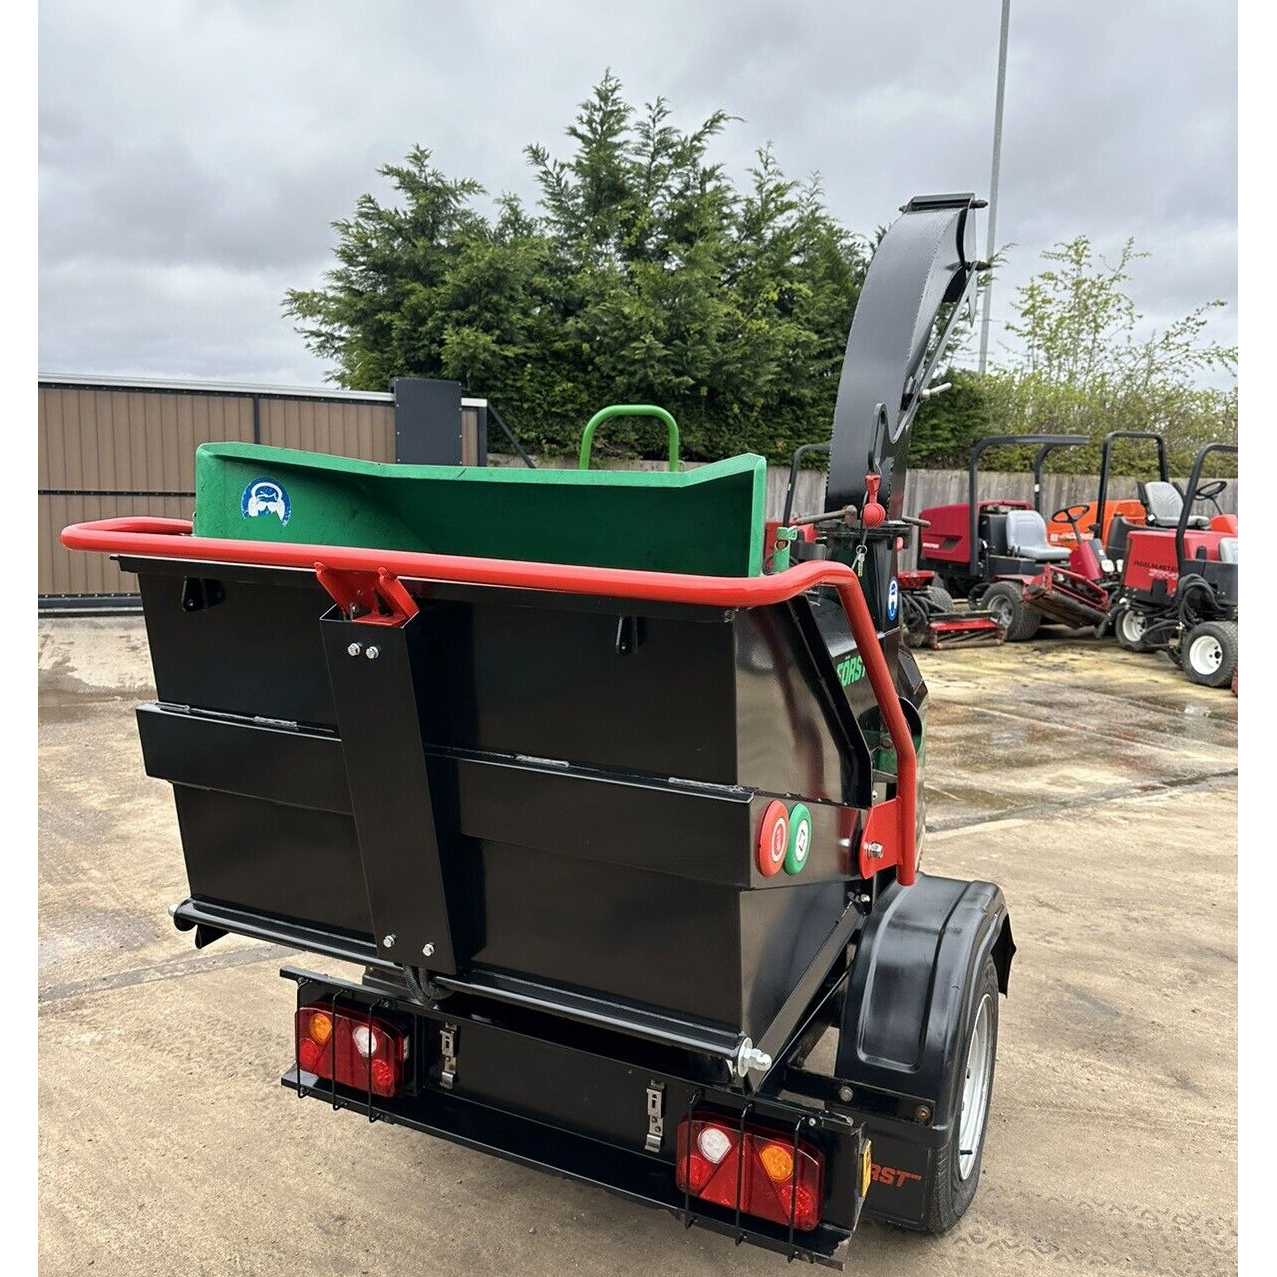 2018 FORST ST6P FAST TOW PETROL WOODCHIPPER